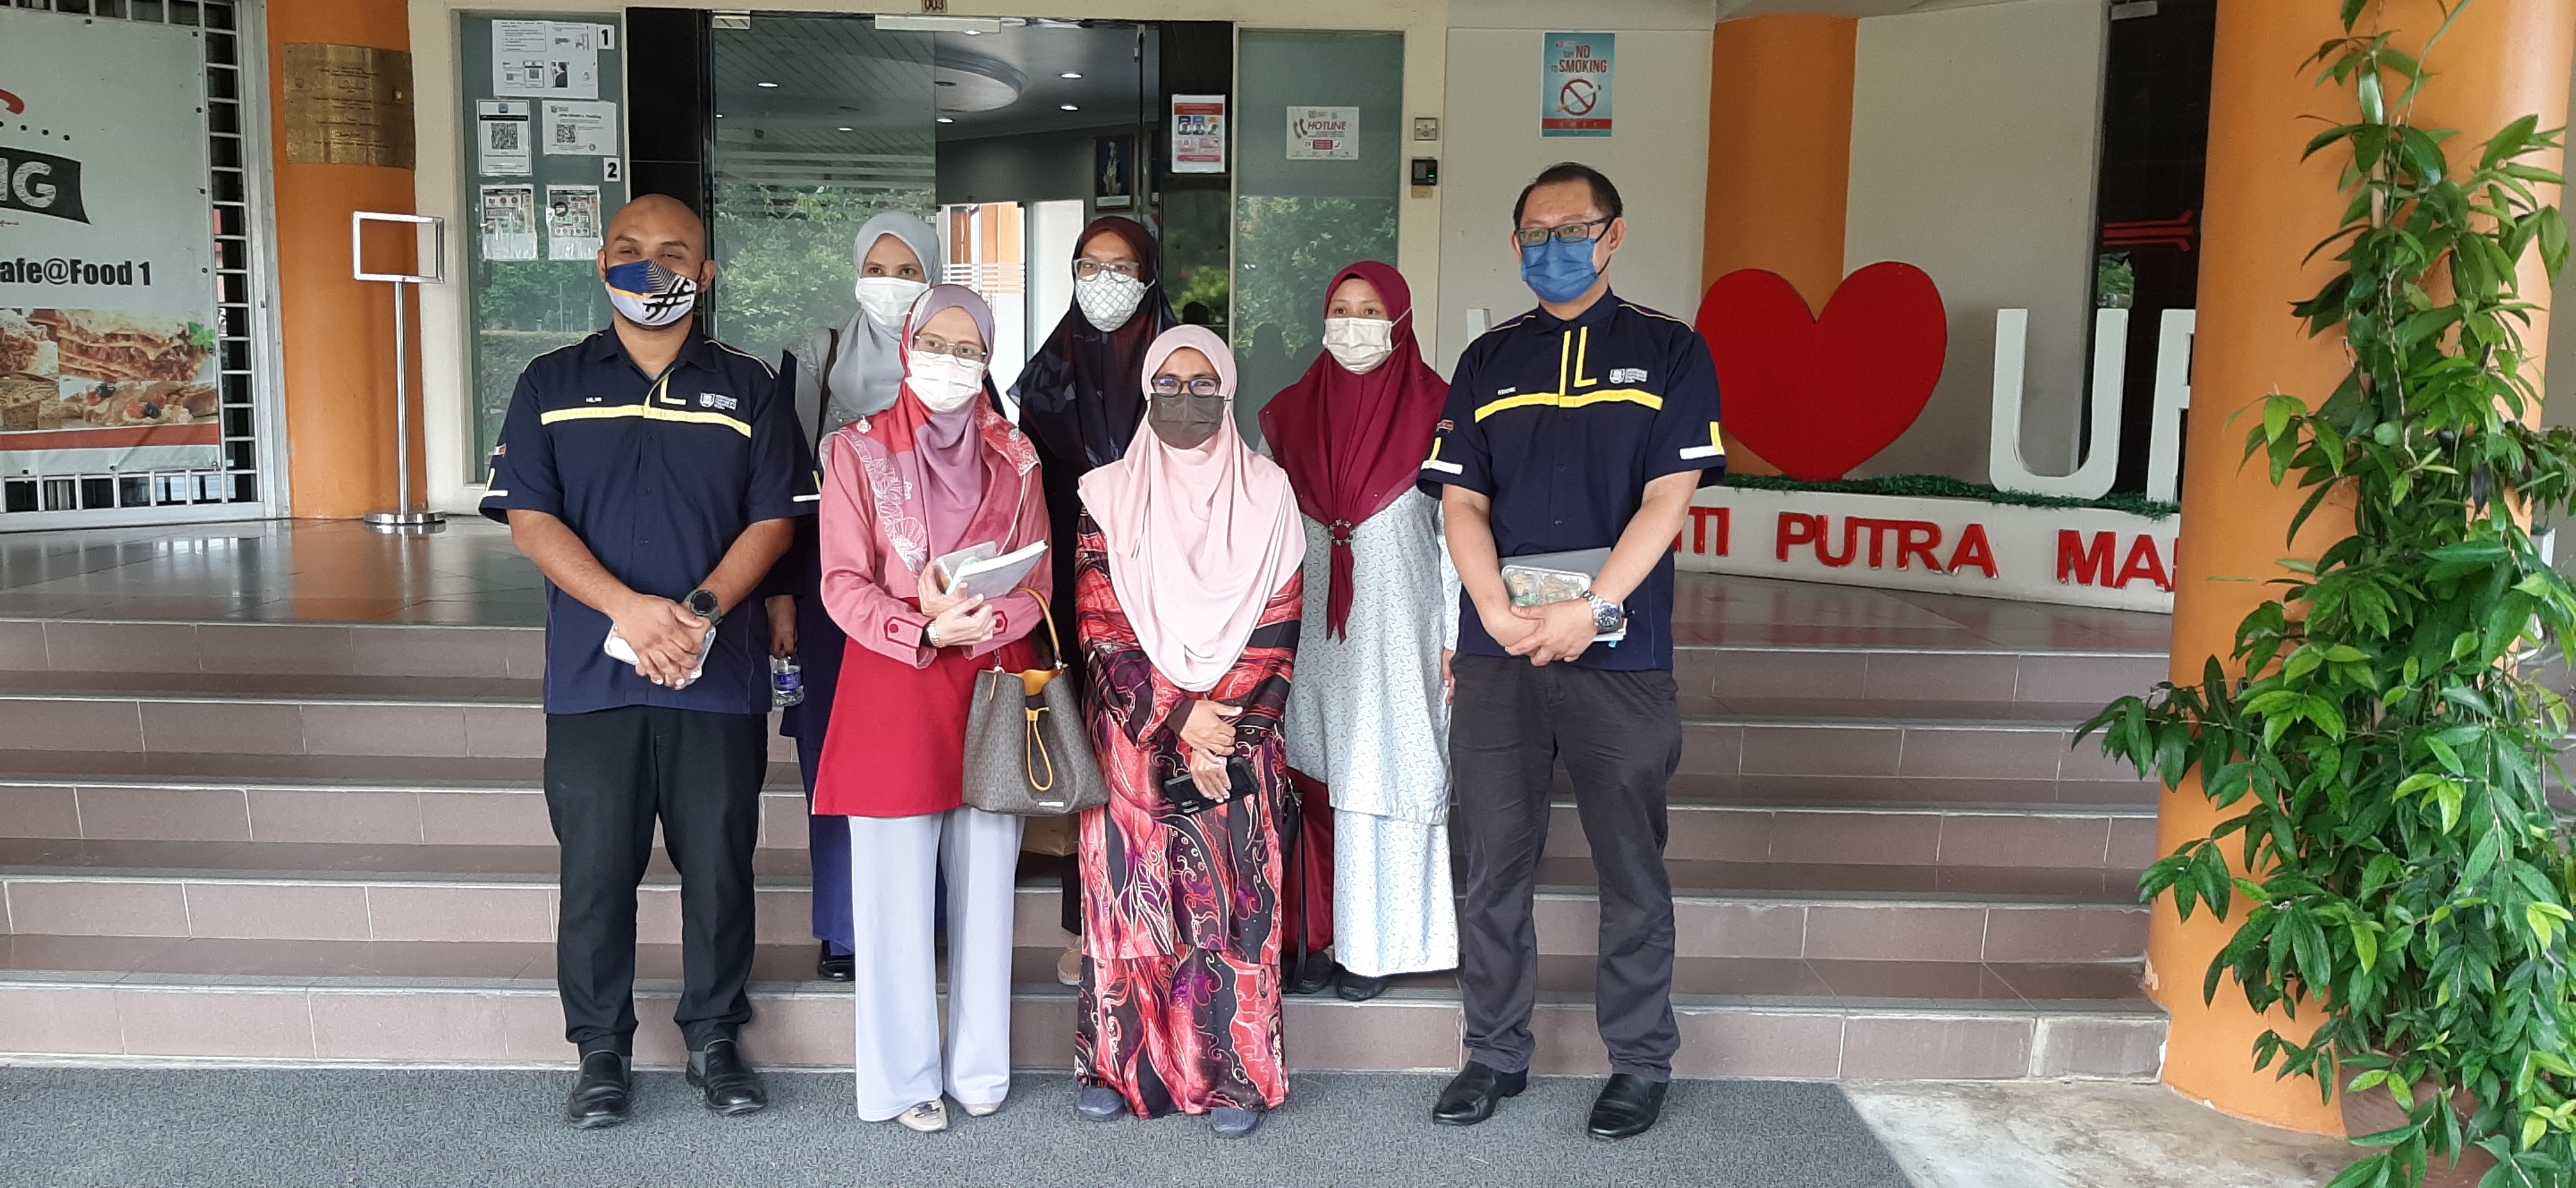 BENCHMARKING VISIT FROM UITM KUALA PILAH CAMPUS TO FACULTY OF FOOD SCIENCE AND TECHNOLOGY